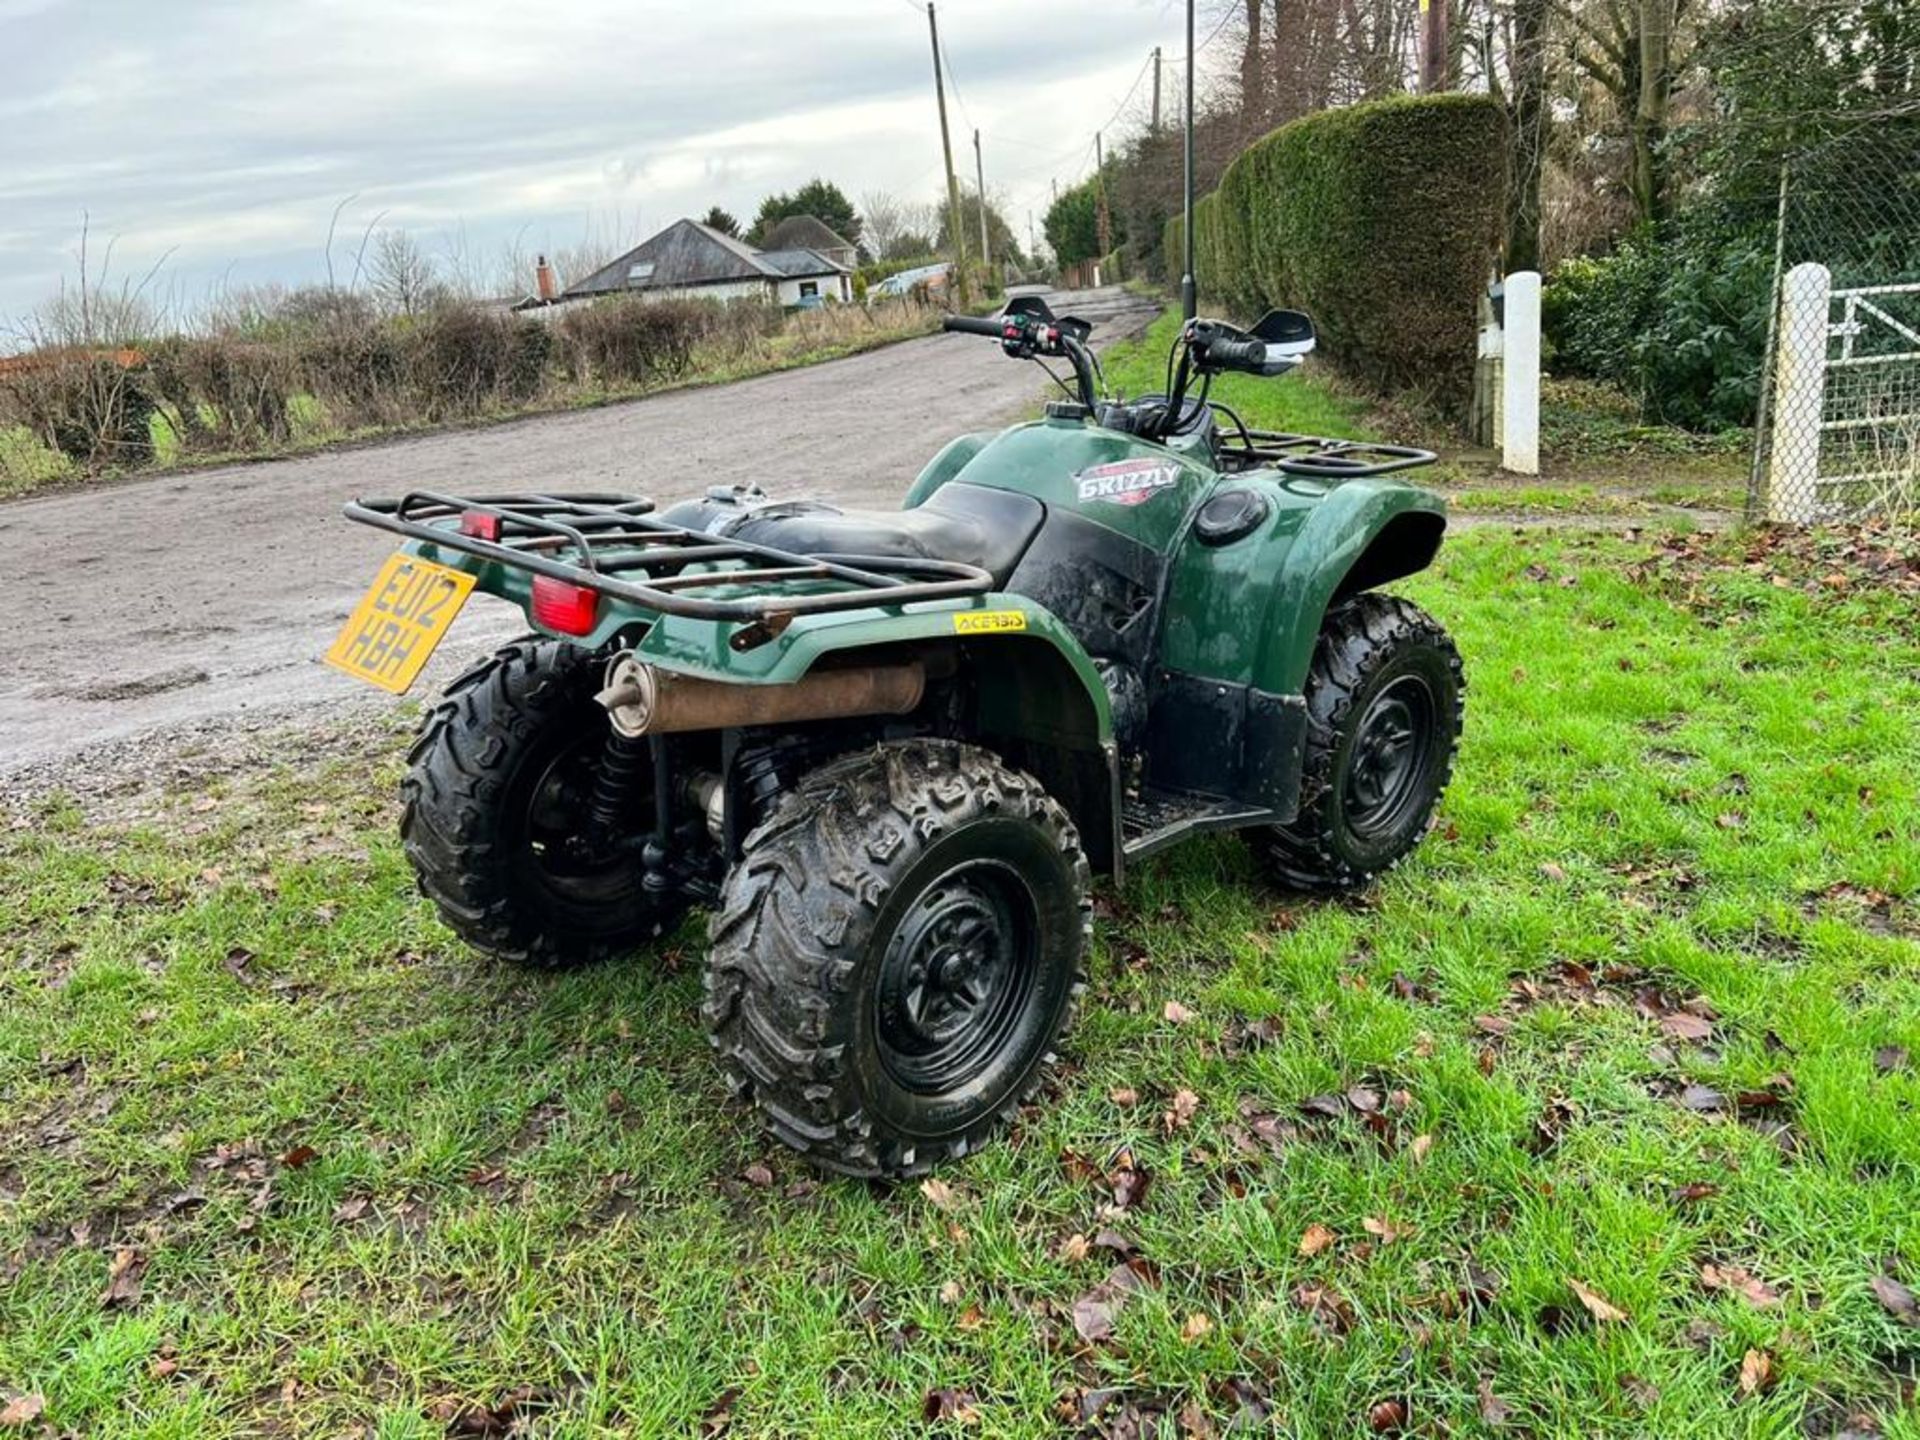 2012 YAMAHA GRIZZLY 450cc FARM QUAD, RUNS AND DRIVES WELL, AGRICULTURAL REGISTERED *NO VAT* - Image 7 of 11